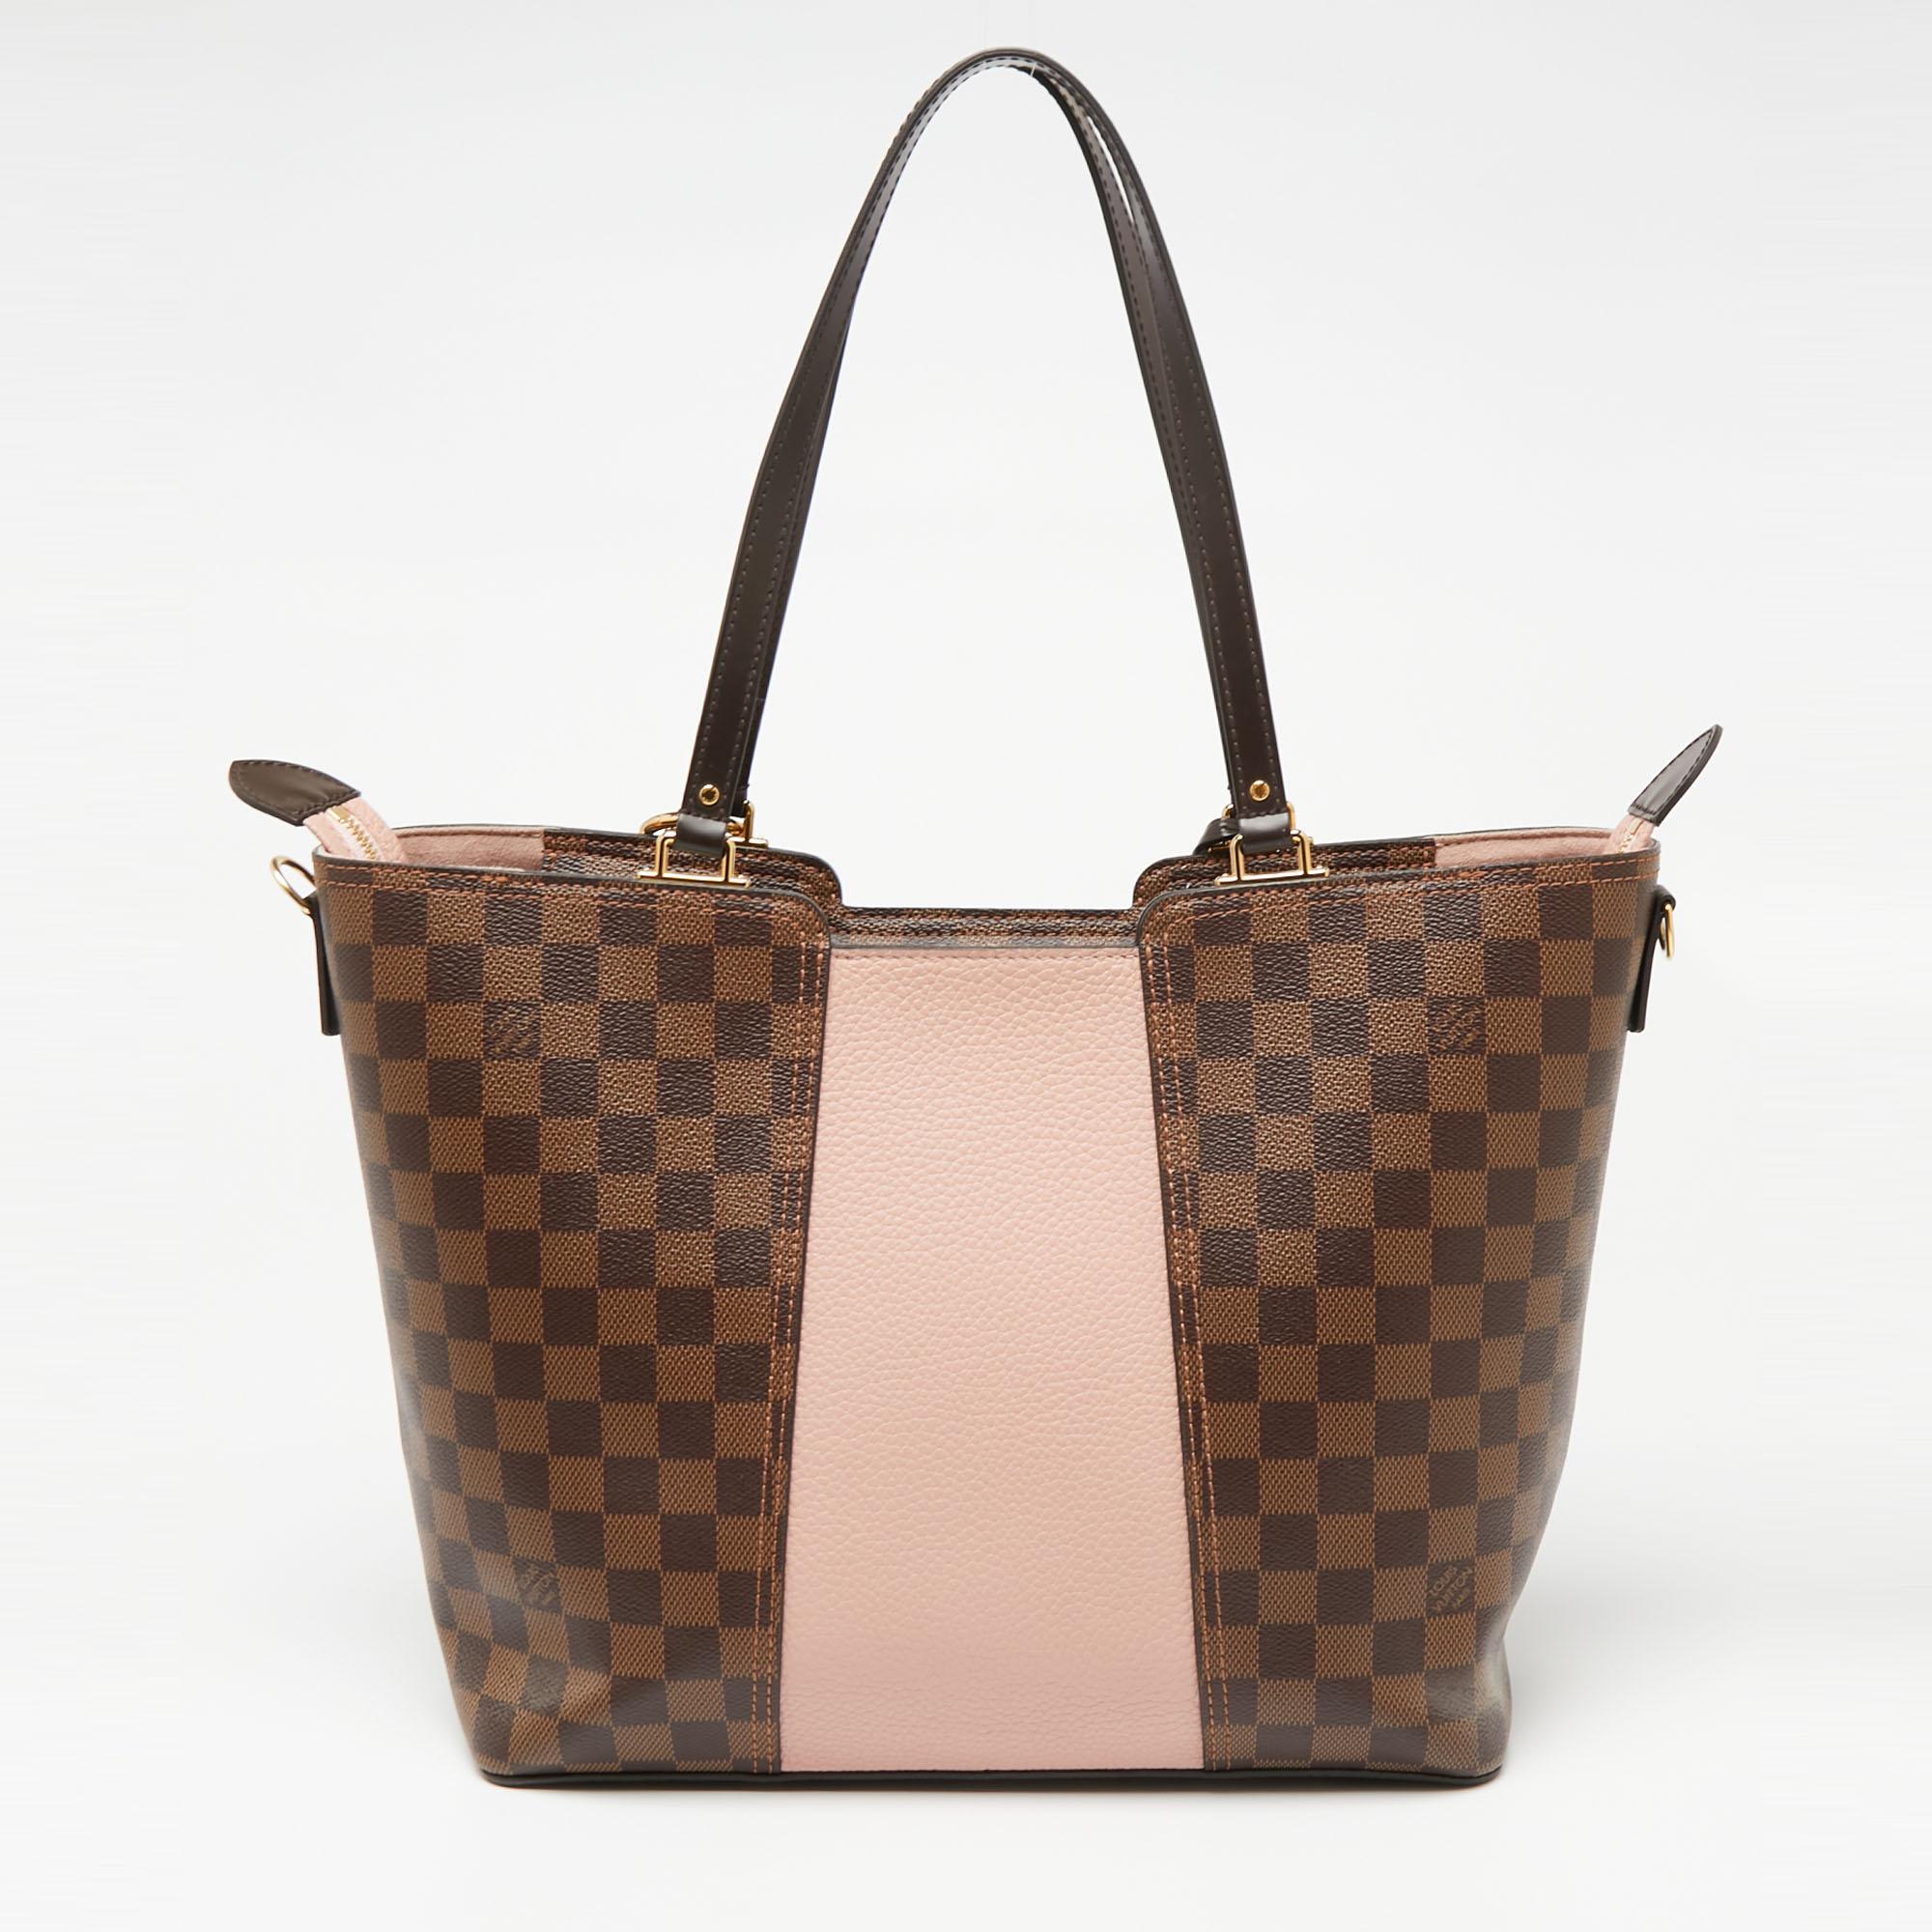 The employment of the signature Damier canvas in its construction gives this Louis Vuitton tote a luxe update. It features a brand-detailed Taurillon leather panel, a shoulder strap, and dual handles. Lined with Alcantara, the interior is secured by